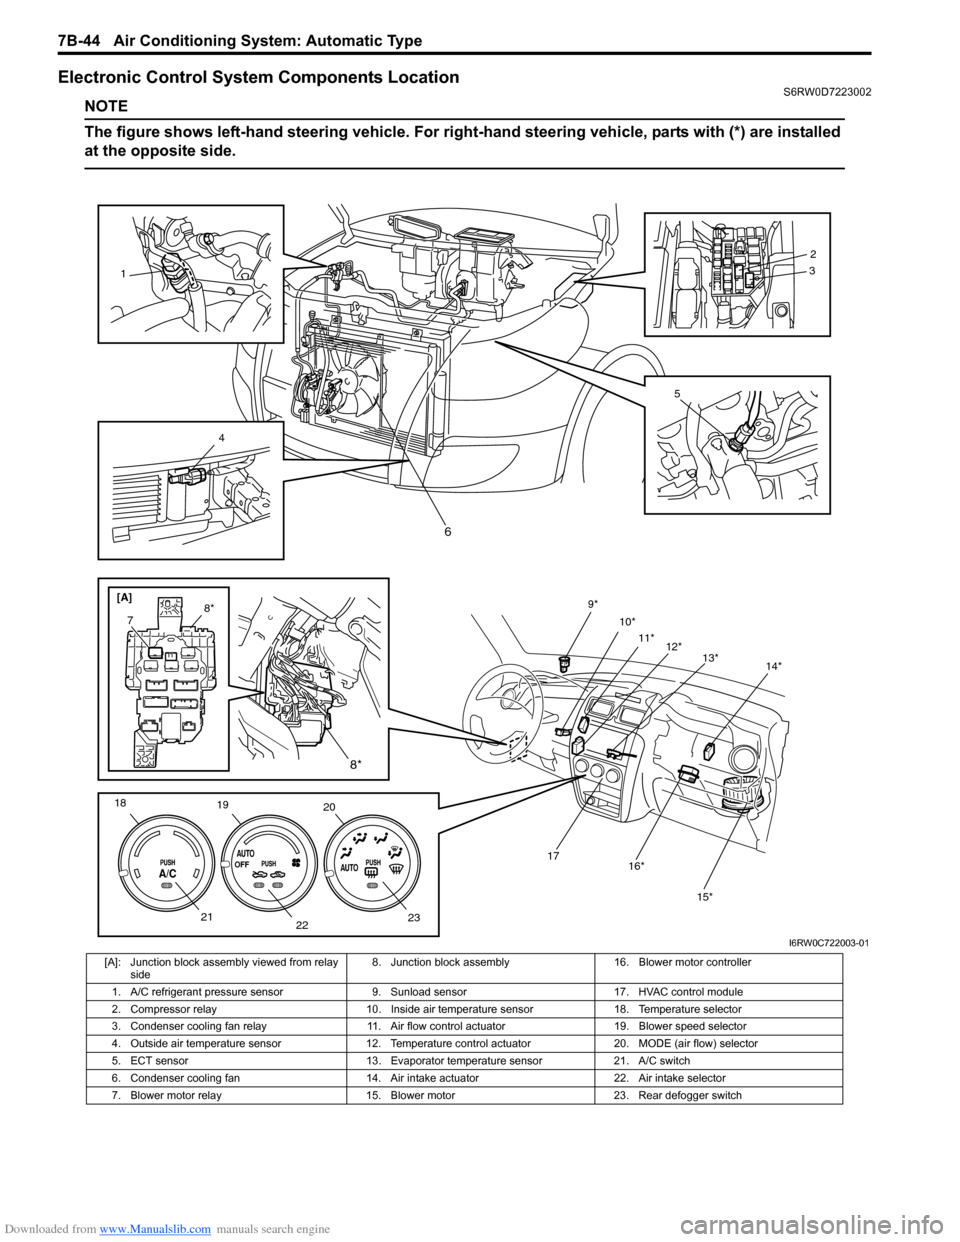 SUZUKI SX4 2006 1.G Service Workshop Manual Downloaded from www.Manualslib.com manuals search engine 7B-44 Air Conditioning System: Automatic Type
Electronic Control System Components LocationS6RW0D7223002
NOTE
The figure shows left-hand steeri